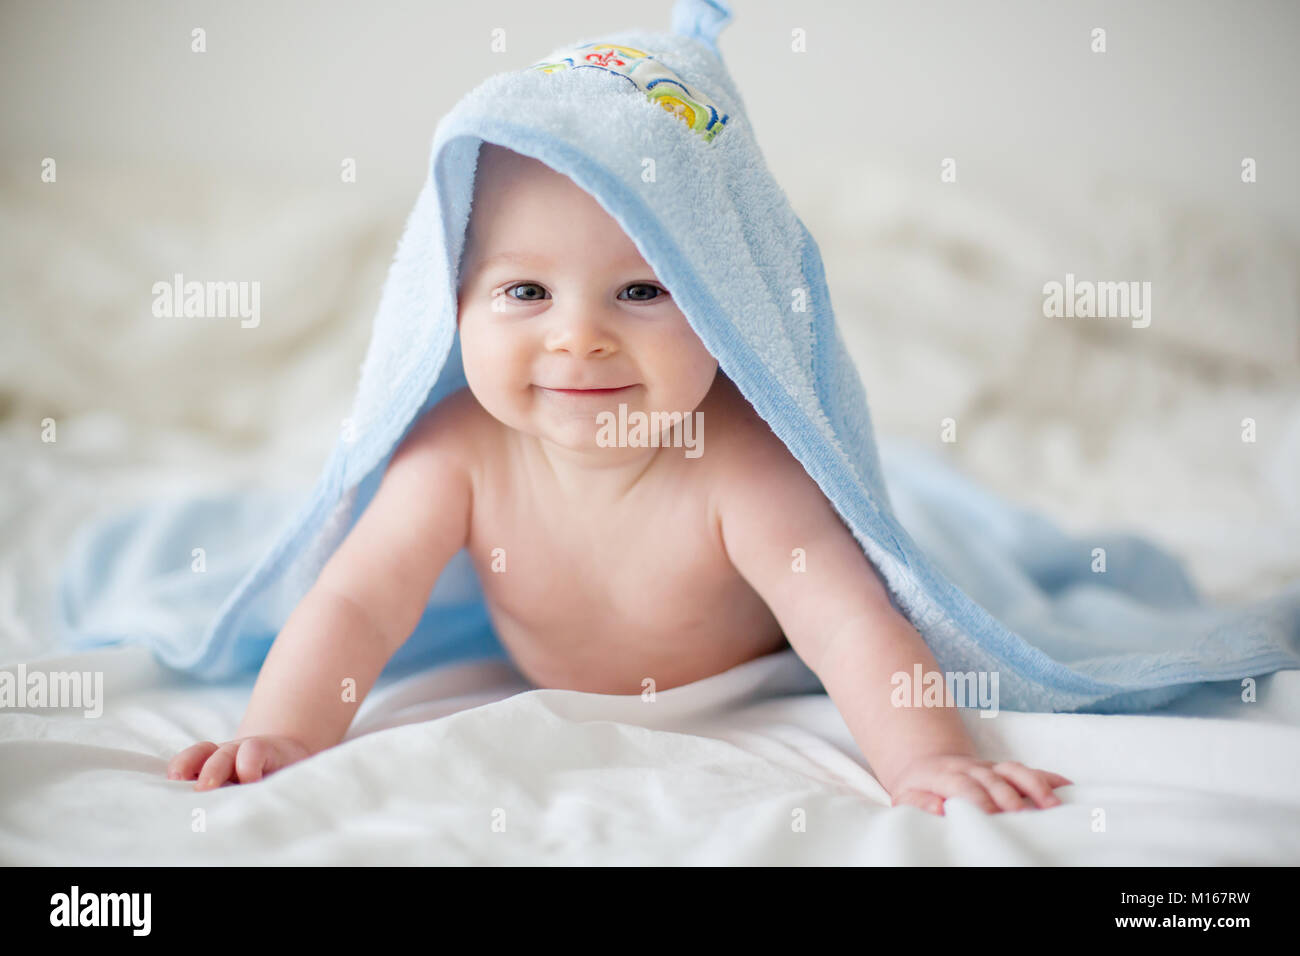 The Ultimate Collection of Cute Little Boy Images – 999+ Adorable Photos in Full 4K Resolution